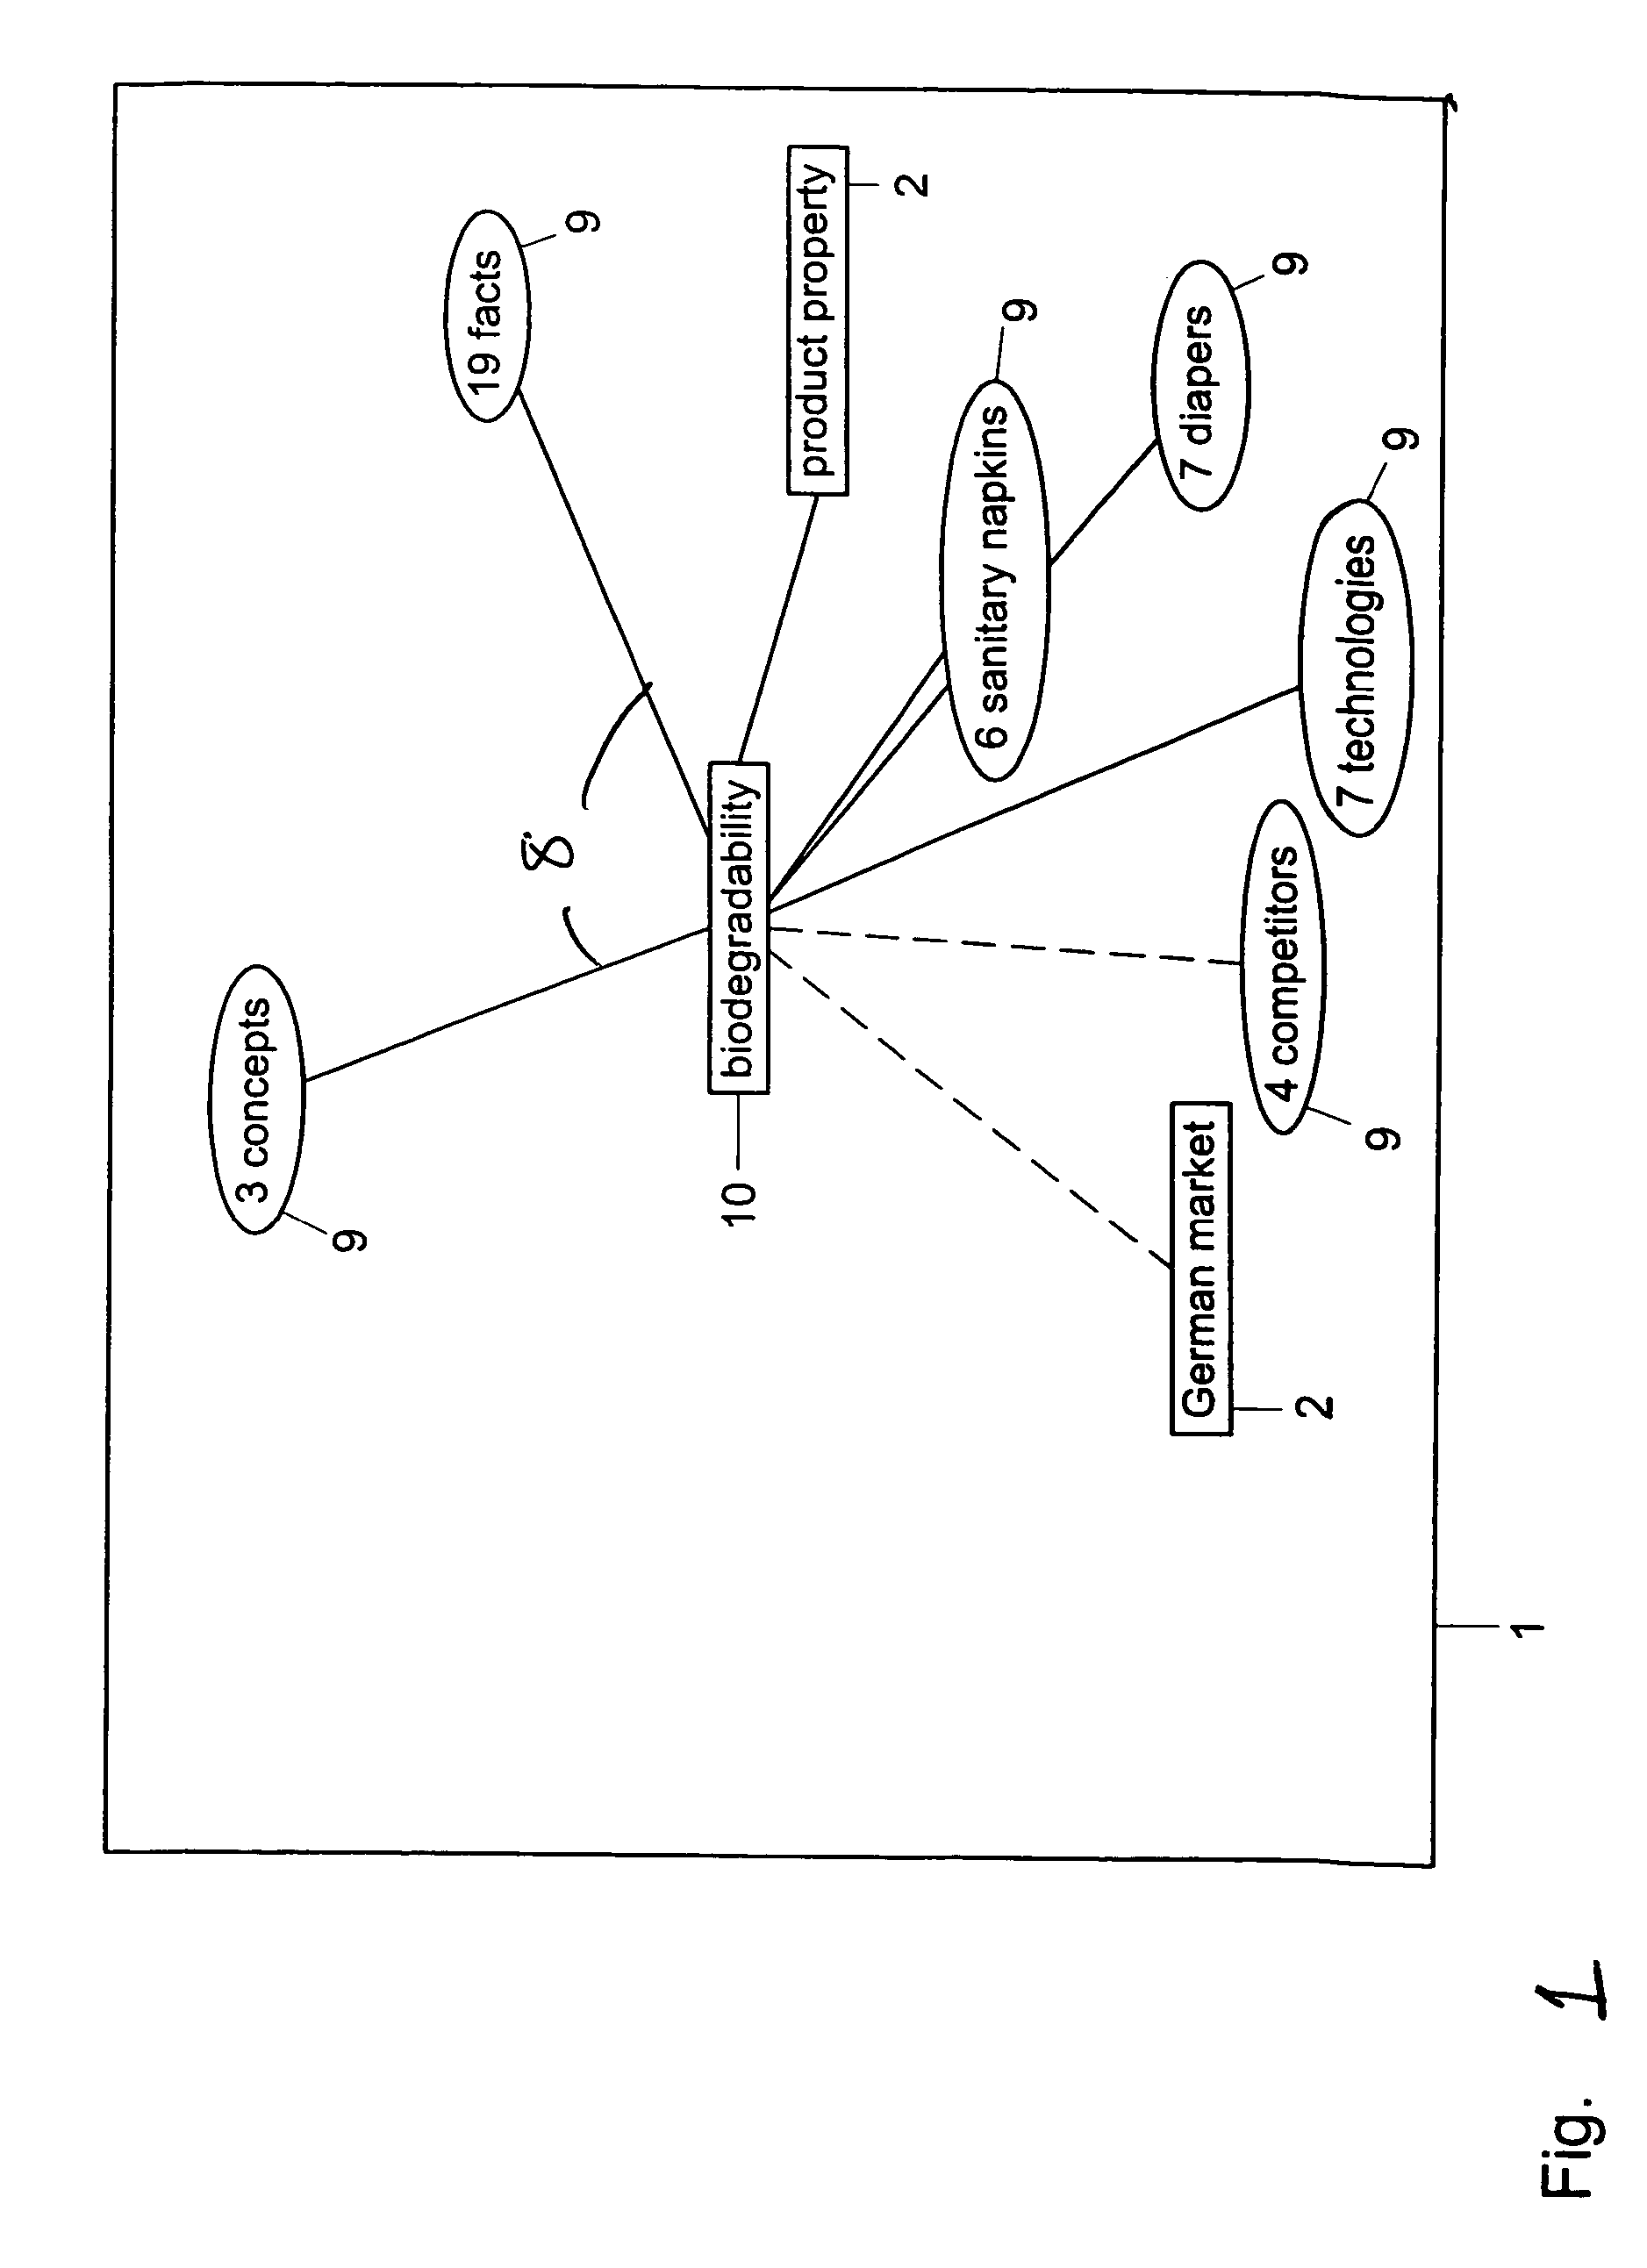 Method and system for restructuring a visualization graph so that entities linked to a common node are replaced by the common node in response to a predetermined stimulus